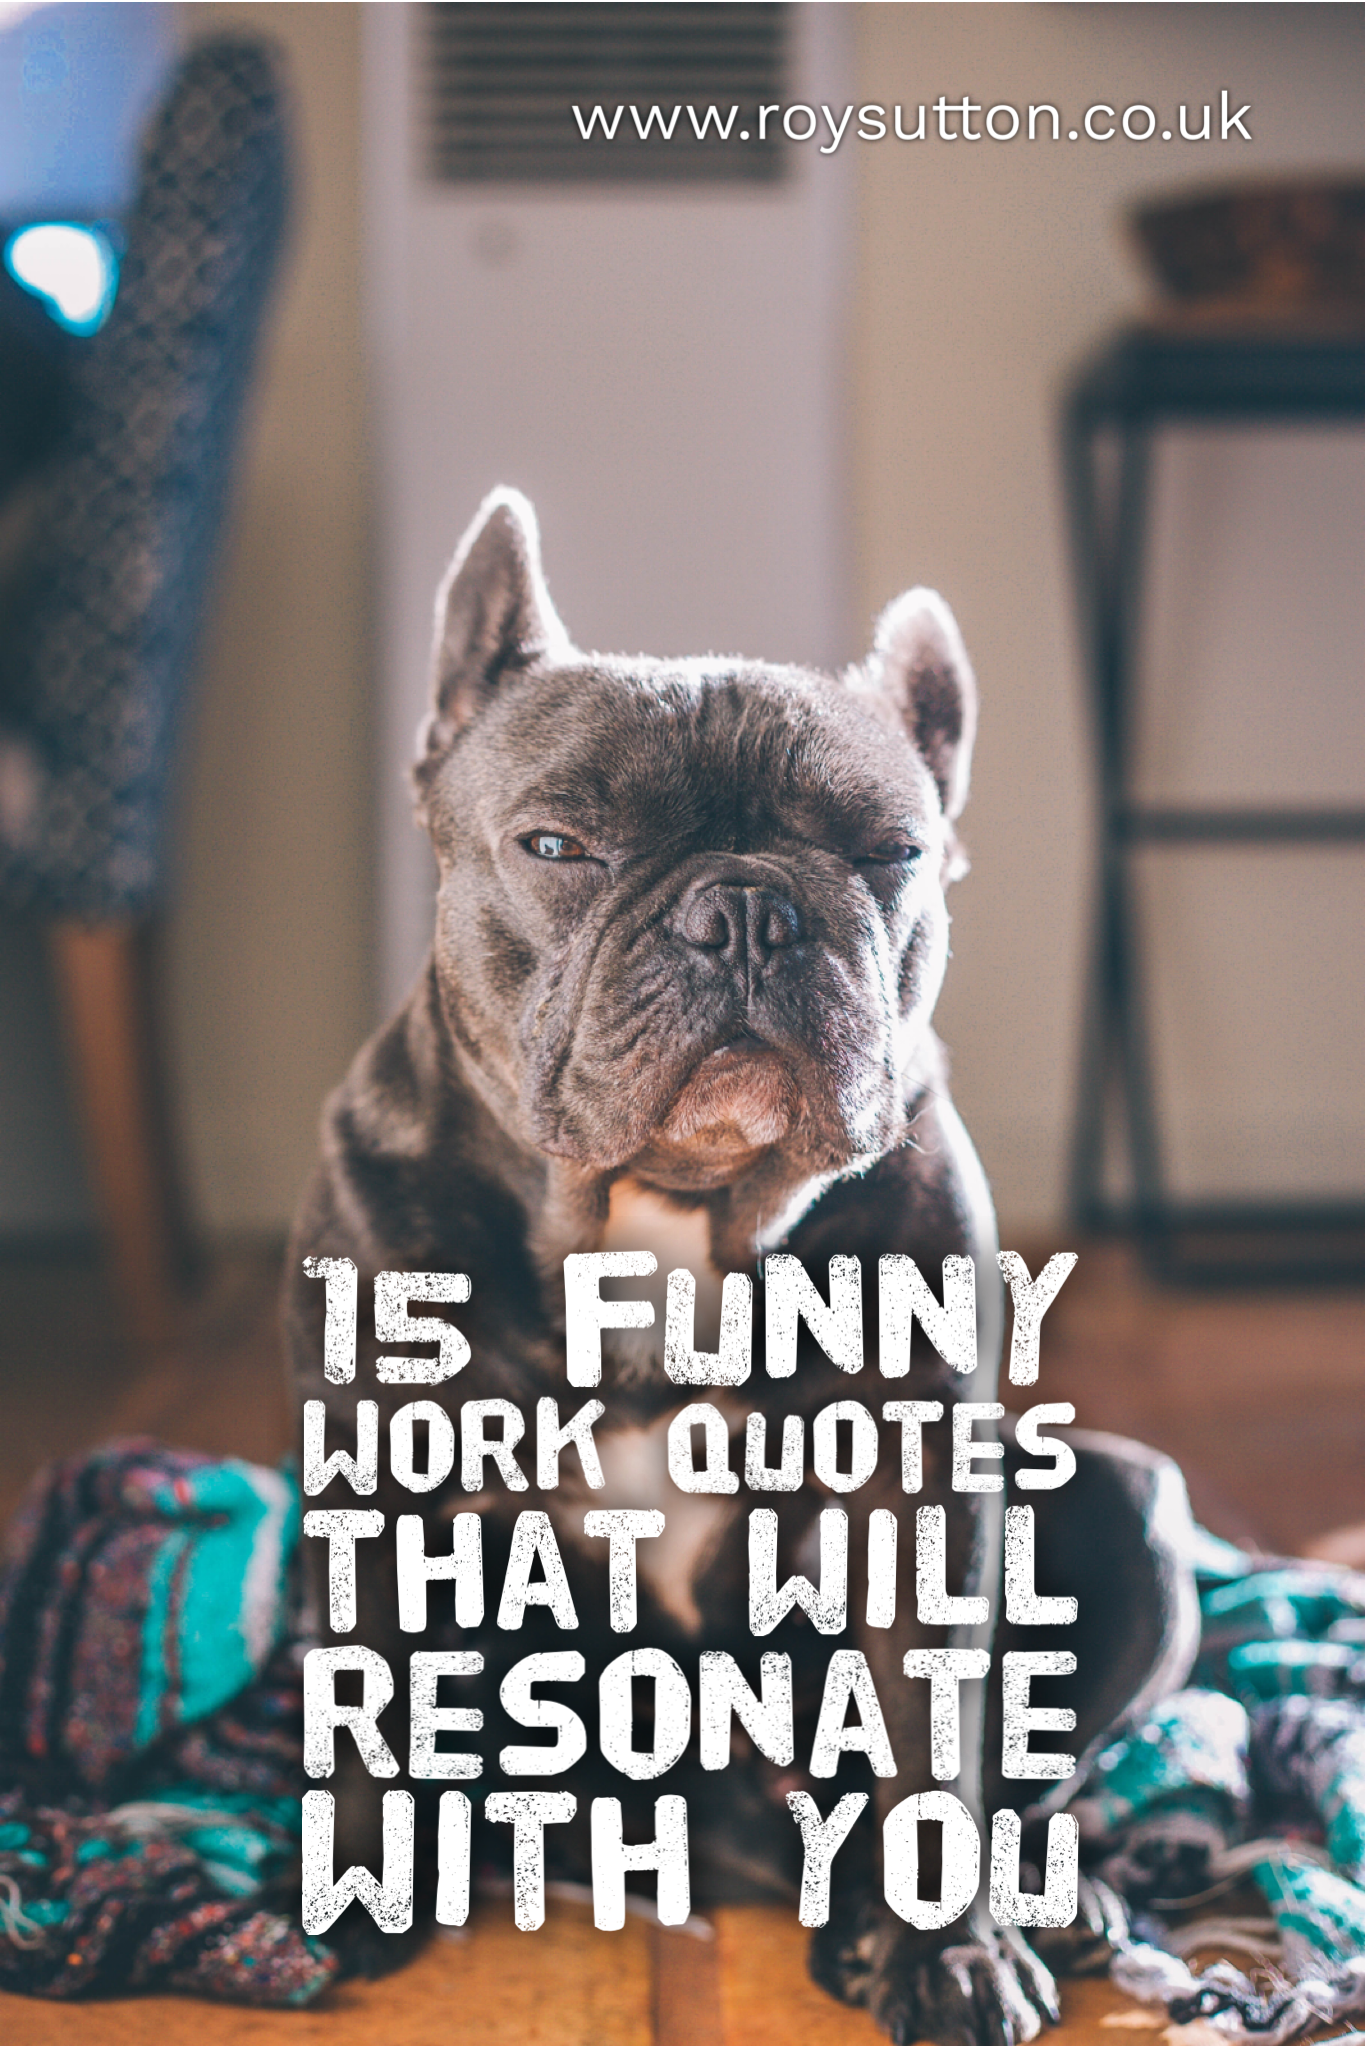 funny-work-quotes-for-tuesday